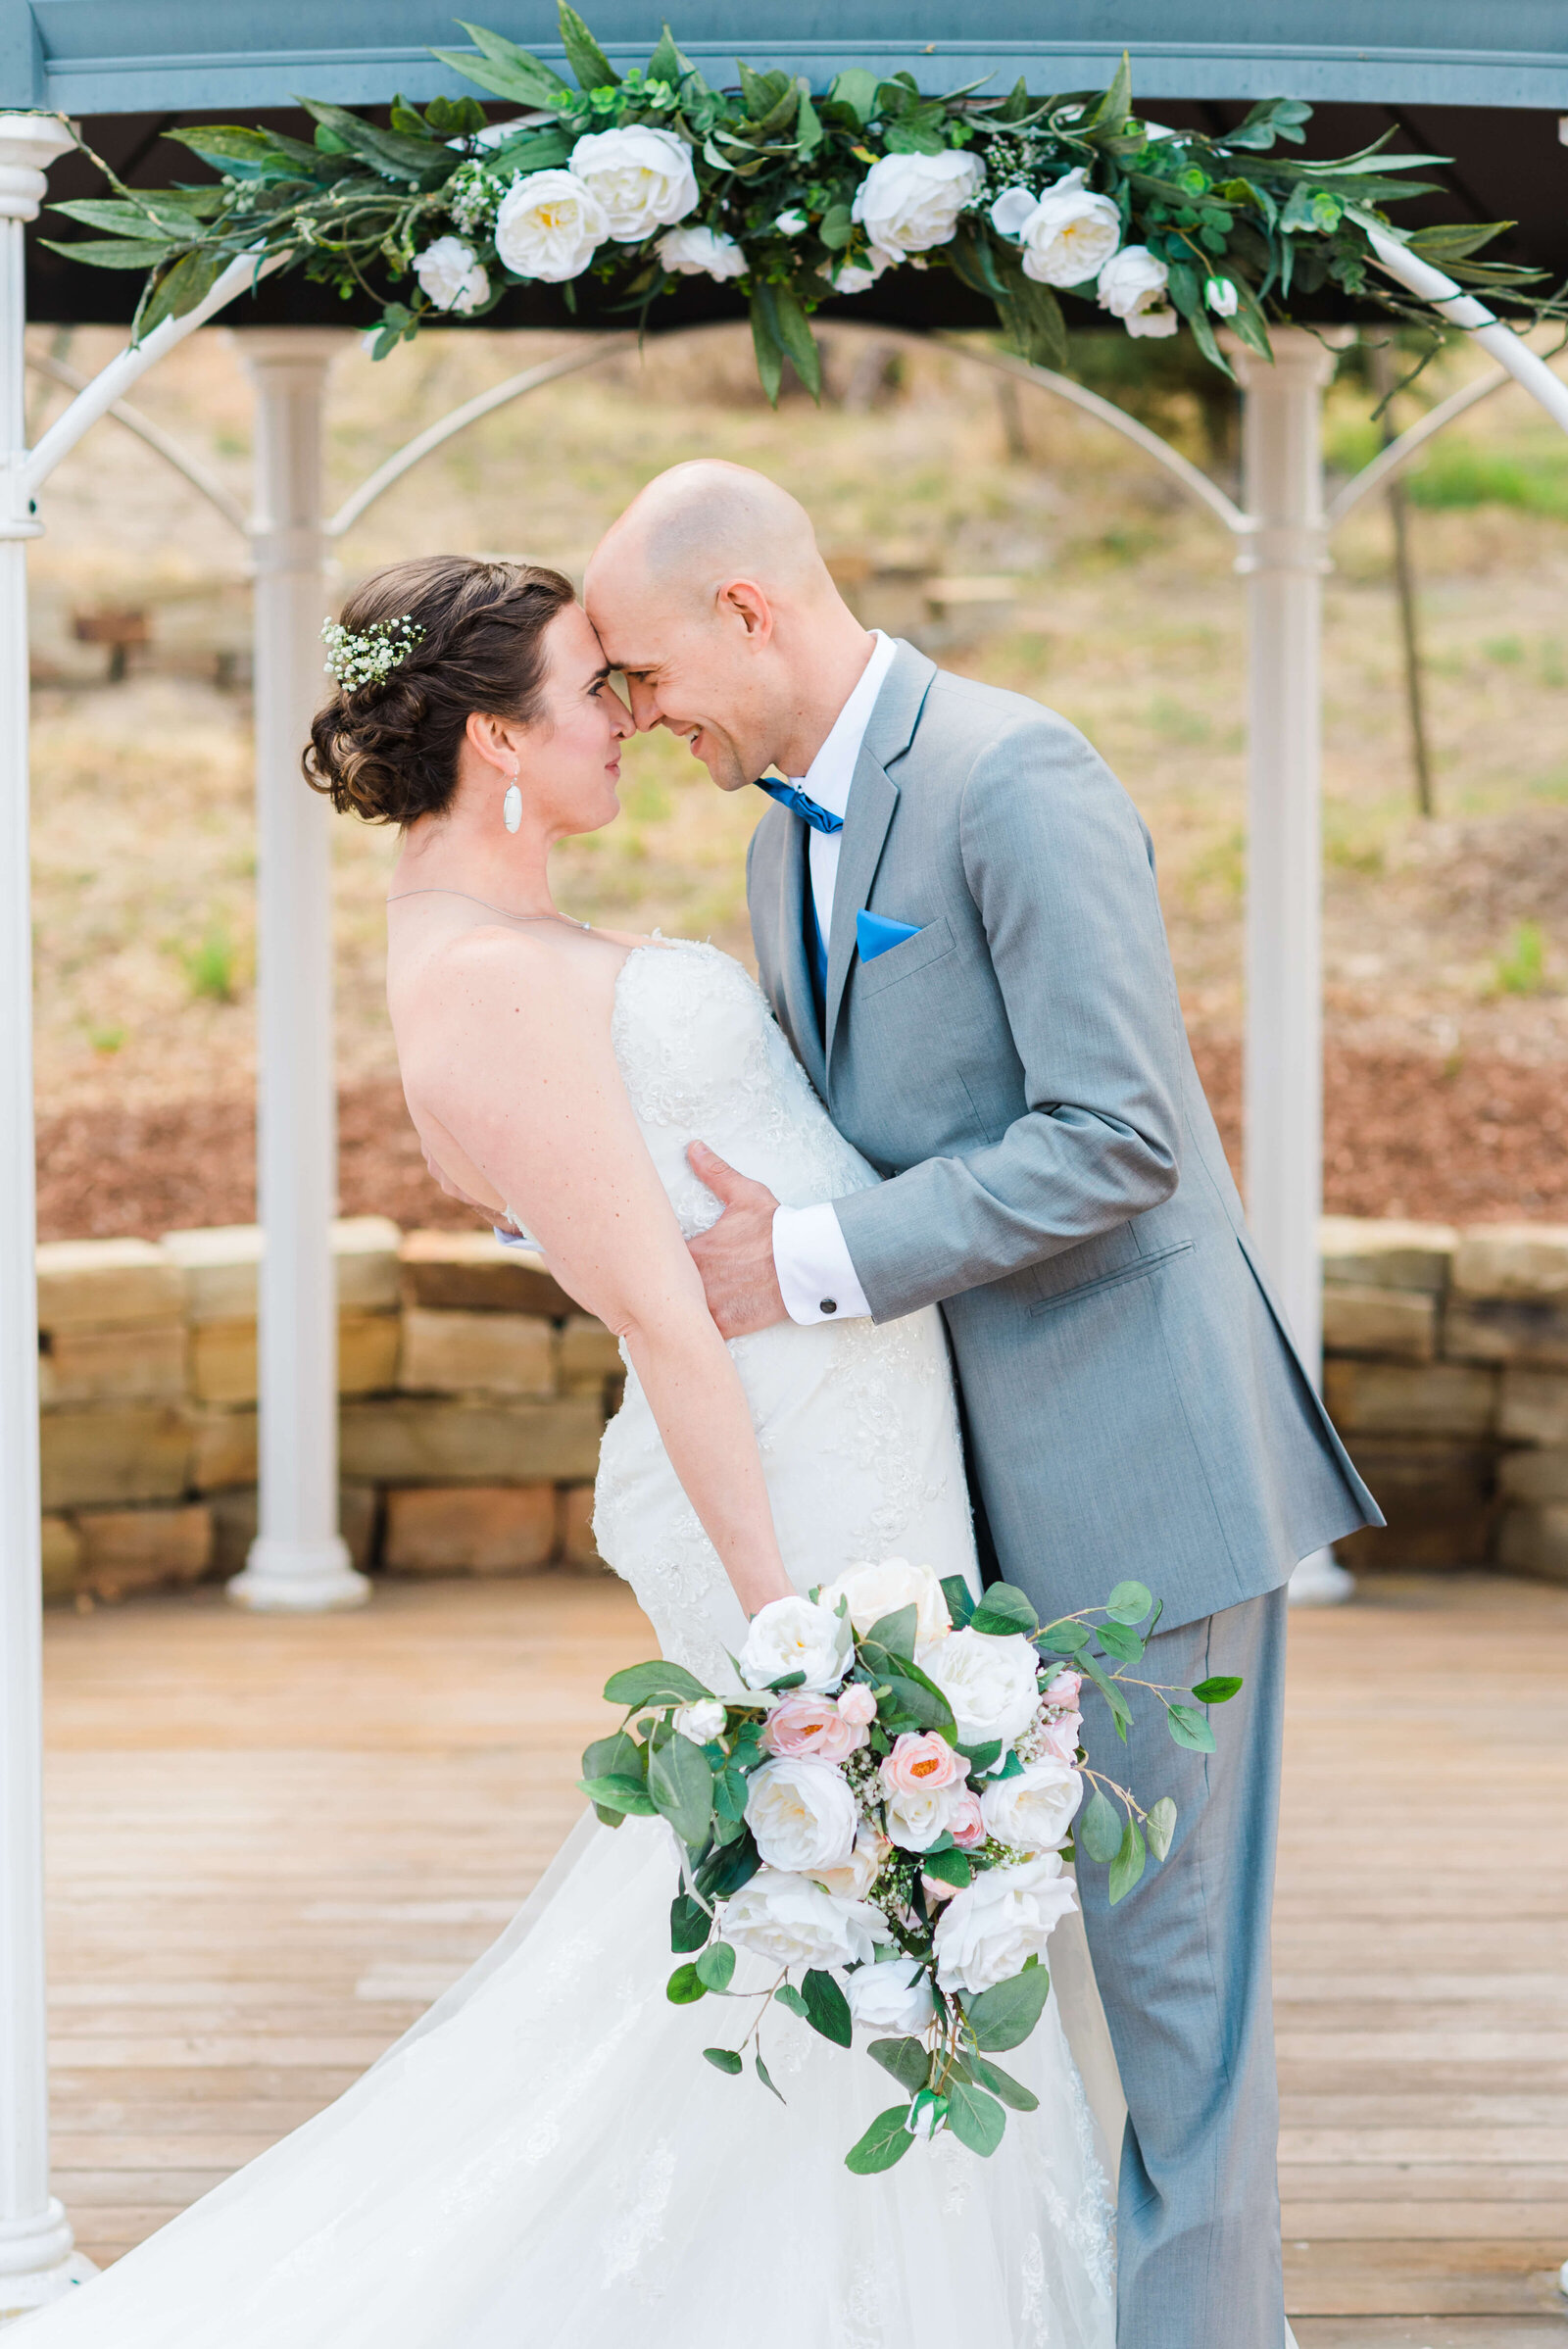 Touching foreheads and smiling at each other, the bride in a white dress and the groom in a grey suit share an intimate moment during a photo captured by Virginia wedding photographer